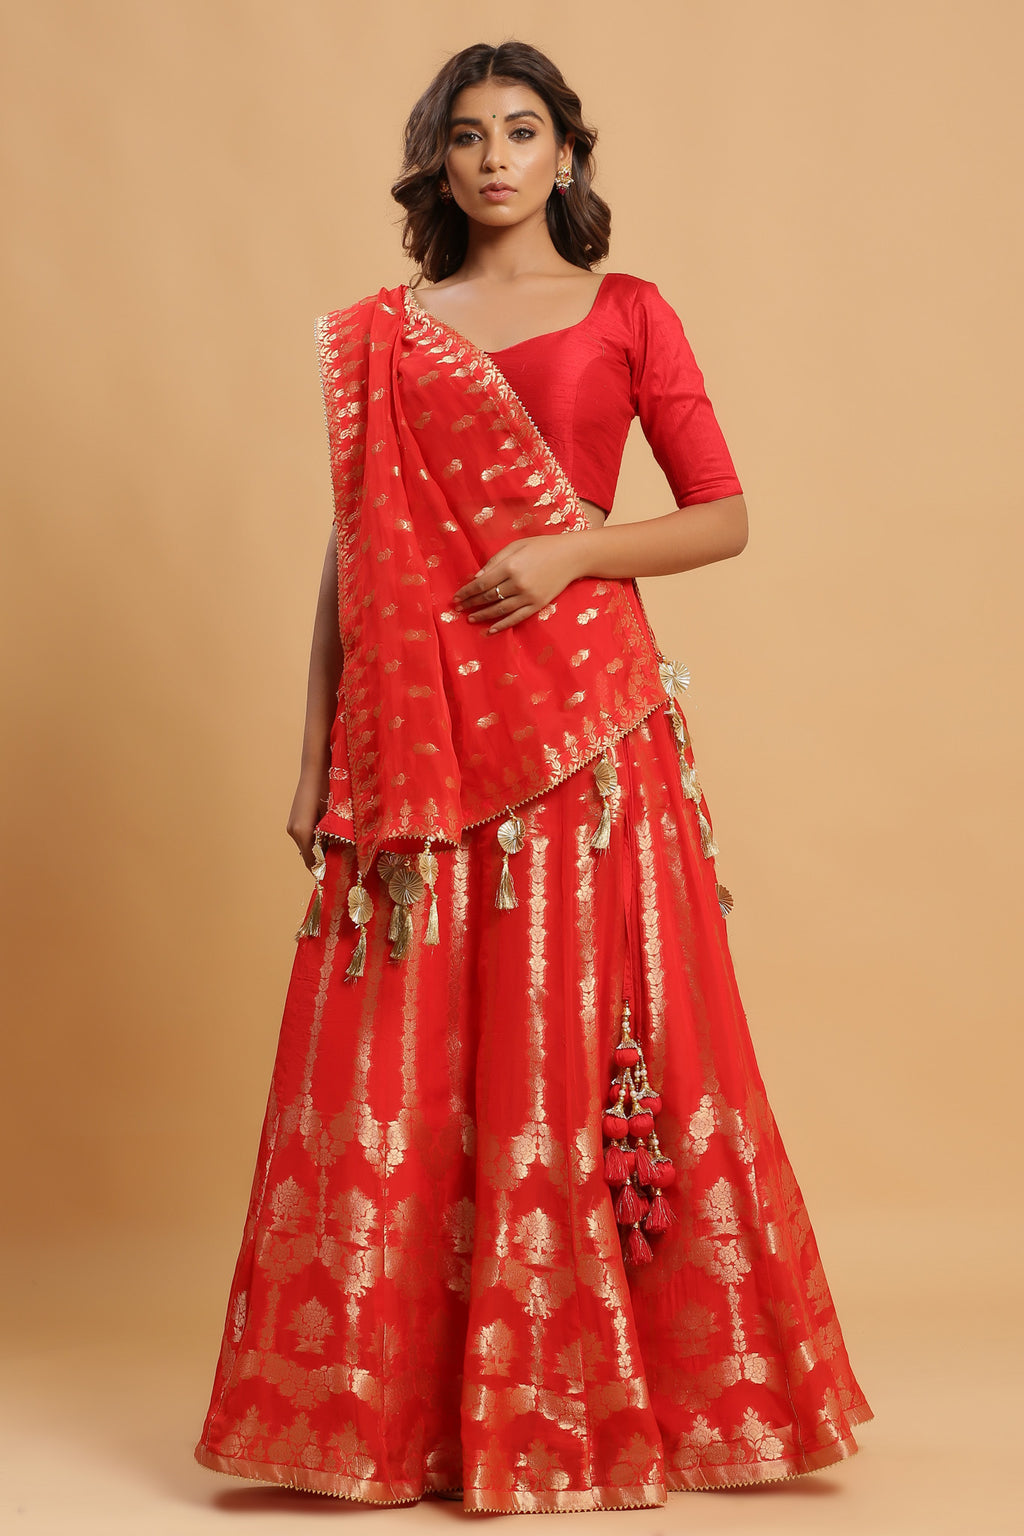 Shop orange zari embroidered lehenga with attached dupatta. It is crafted in silk with intrinsic zari embroidery on the lehenga and solid blouse tassels on a dupatta, with beautiful heavy tassels attached to the lehenga. Shop online from Pure Elegance.